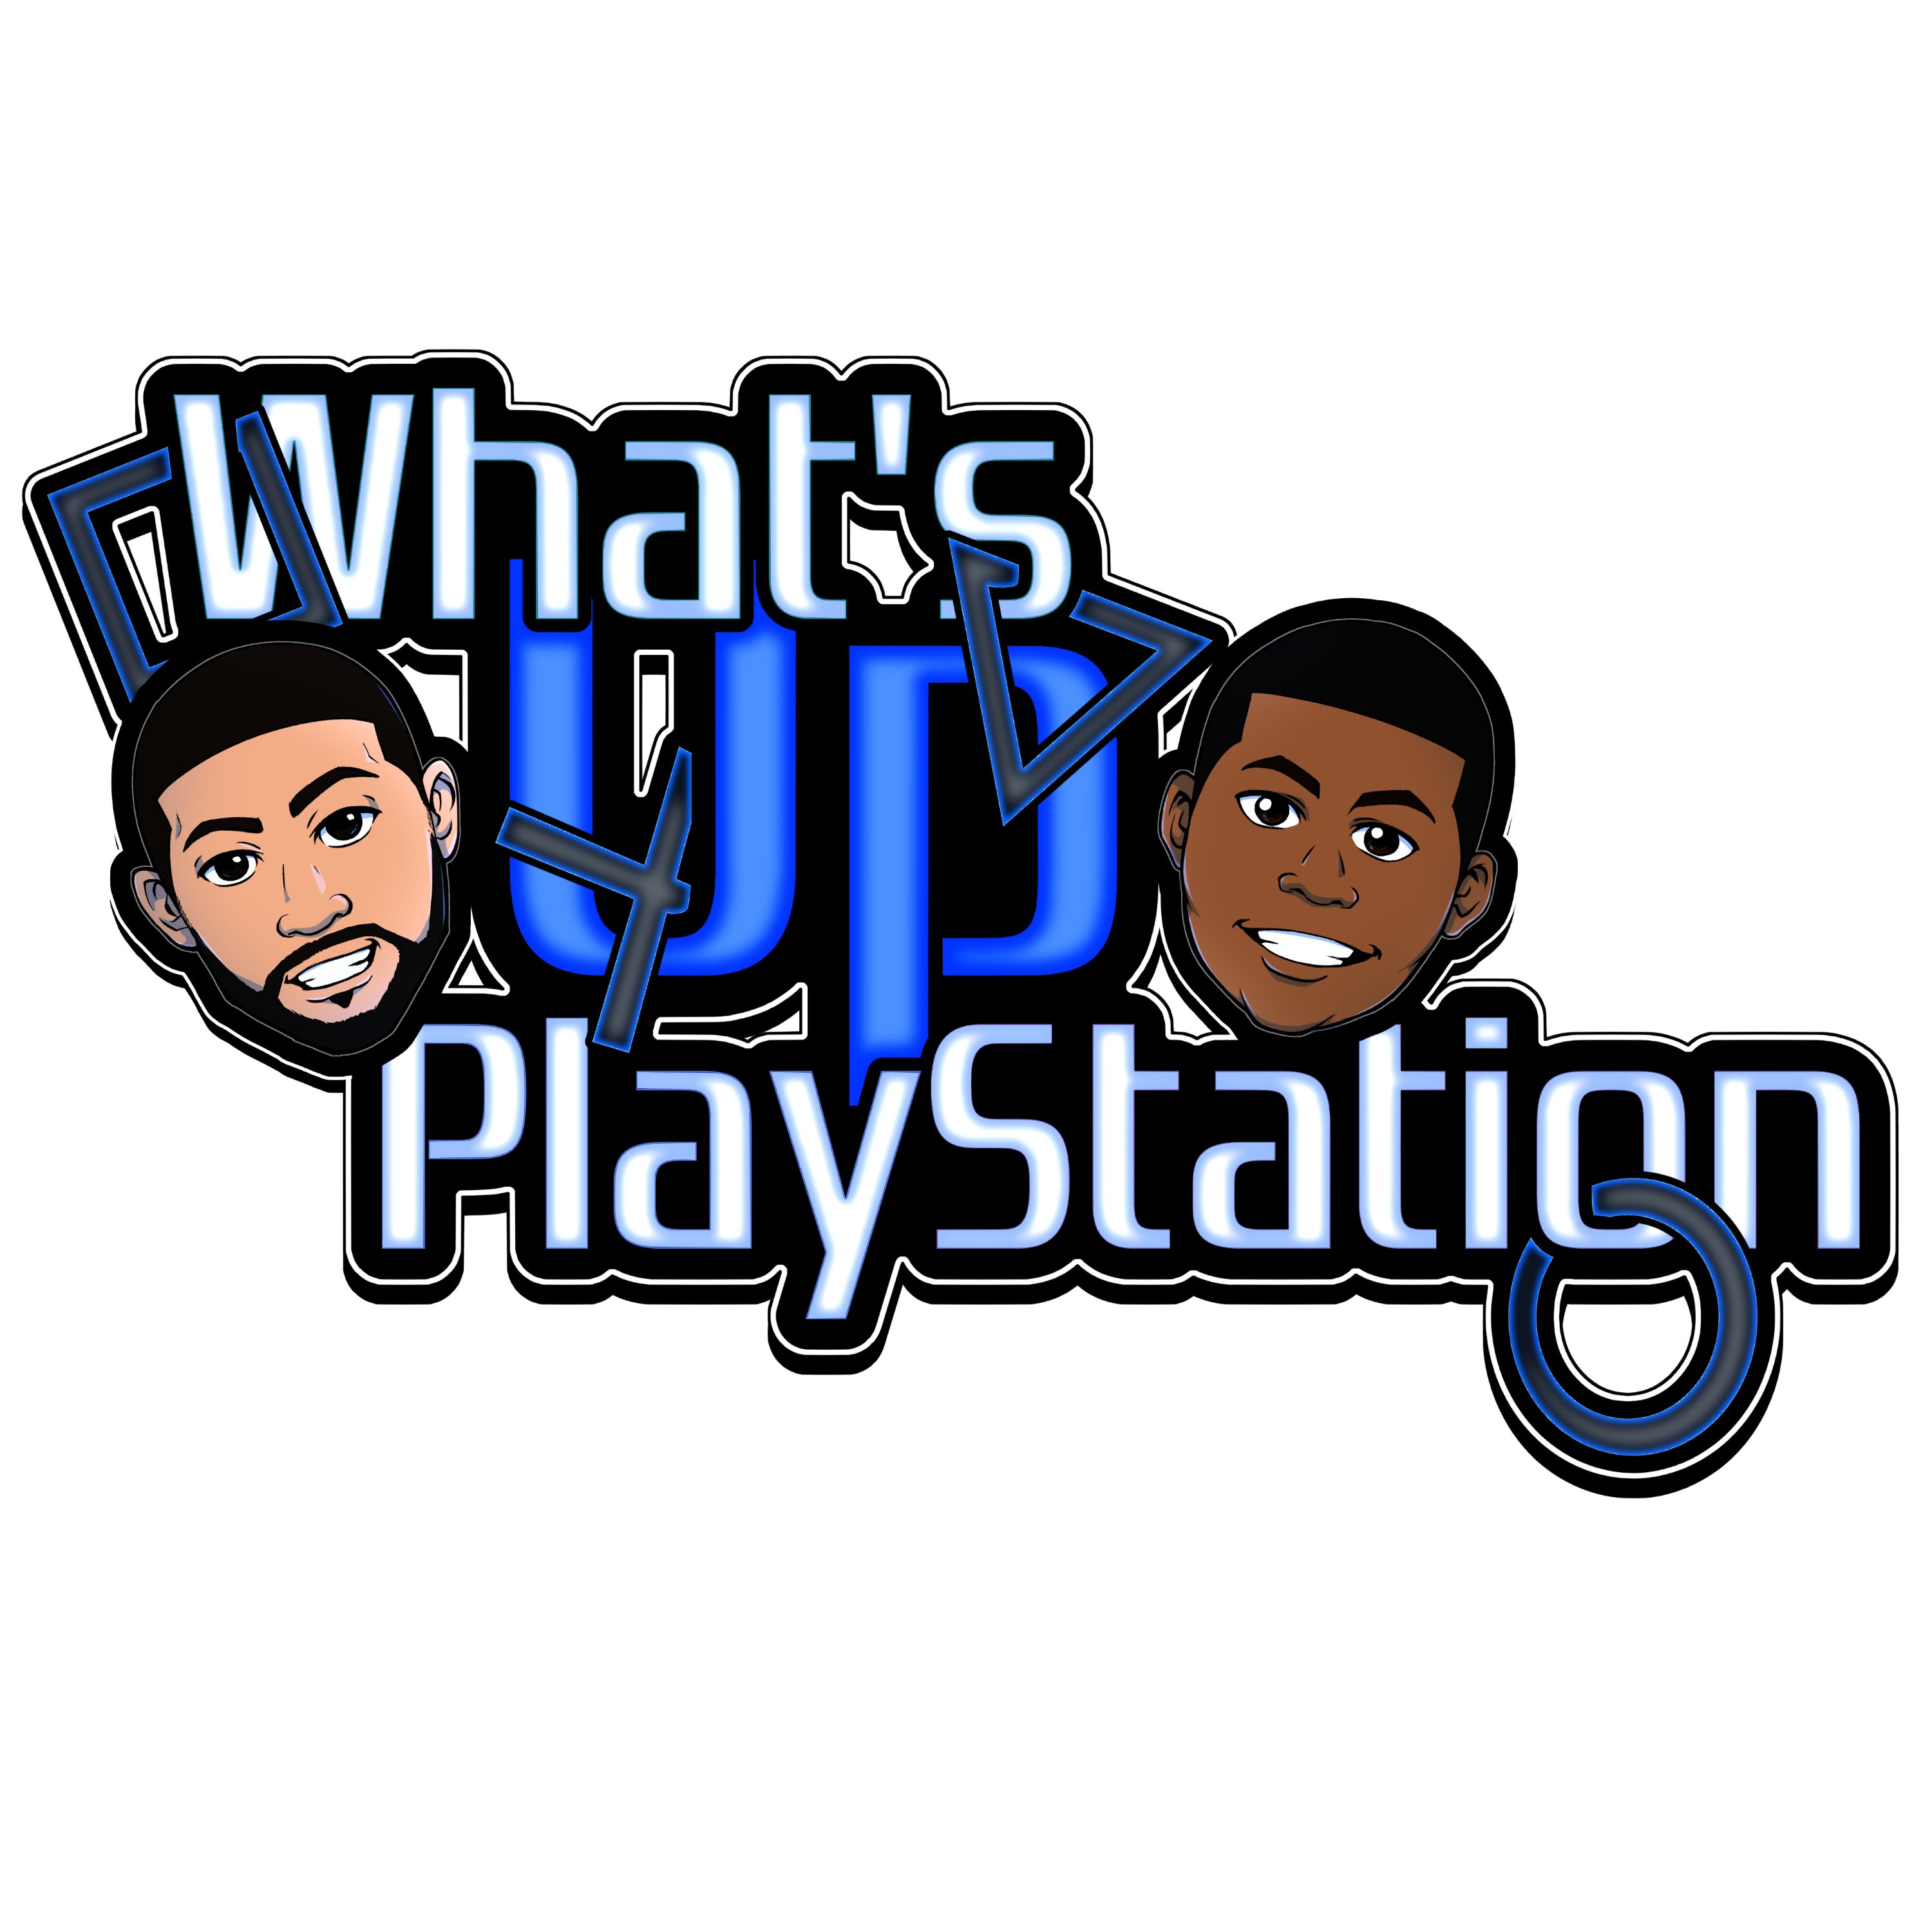 What's Up PlayStation on X: "What's Up PlayStation Podcast (w/ @JayBari_ &  @PersonaSpeaks) Ep. 150 is now available on ALL of your favorite podcast  streaming platforms! (Apple, Spotify, etc) 👇👇👇 Link:  https://t.co/FBbJsSWwJS "